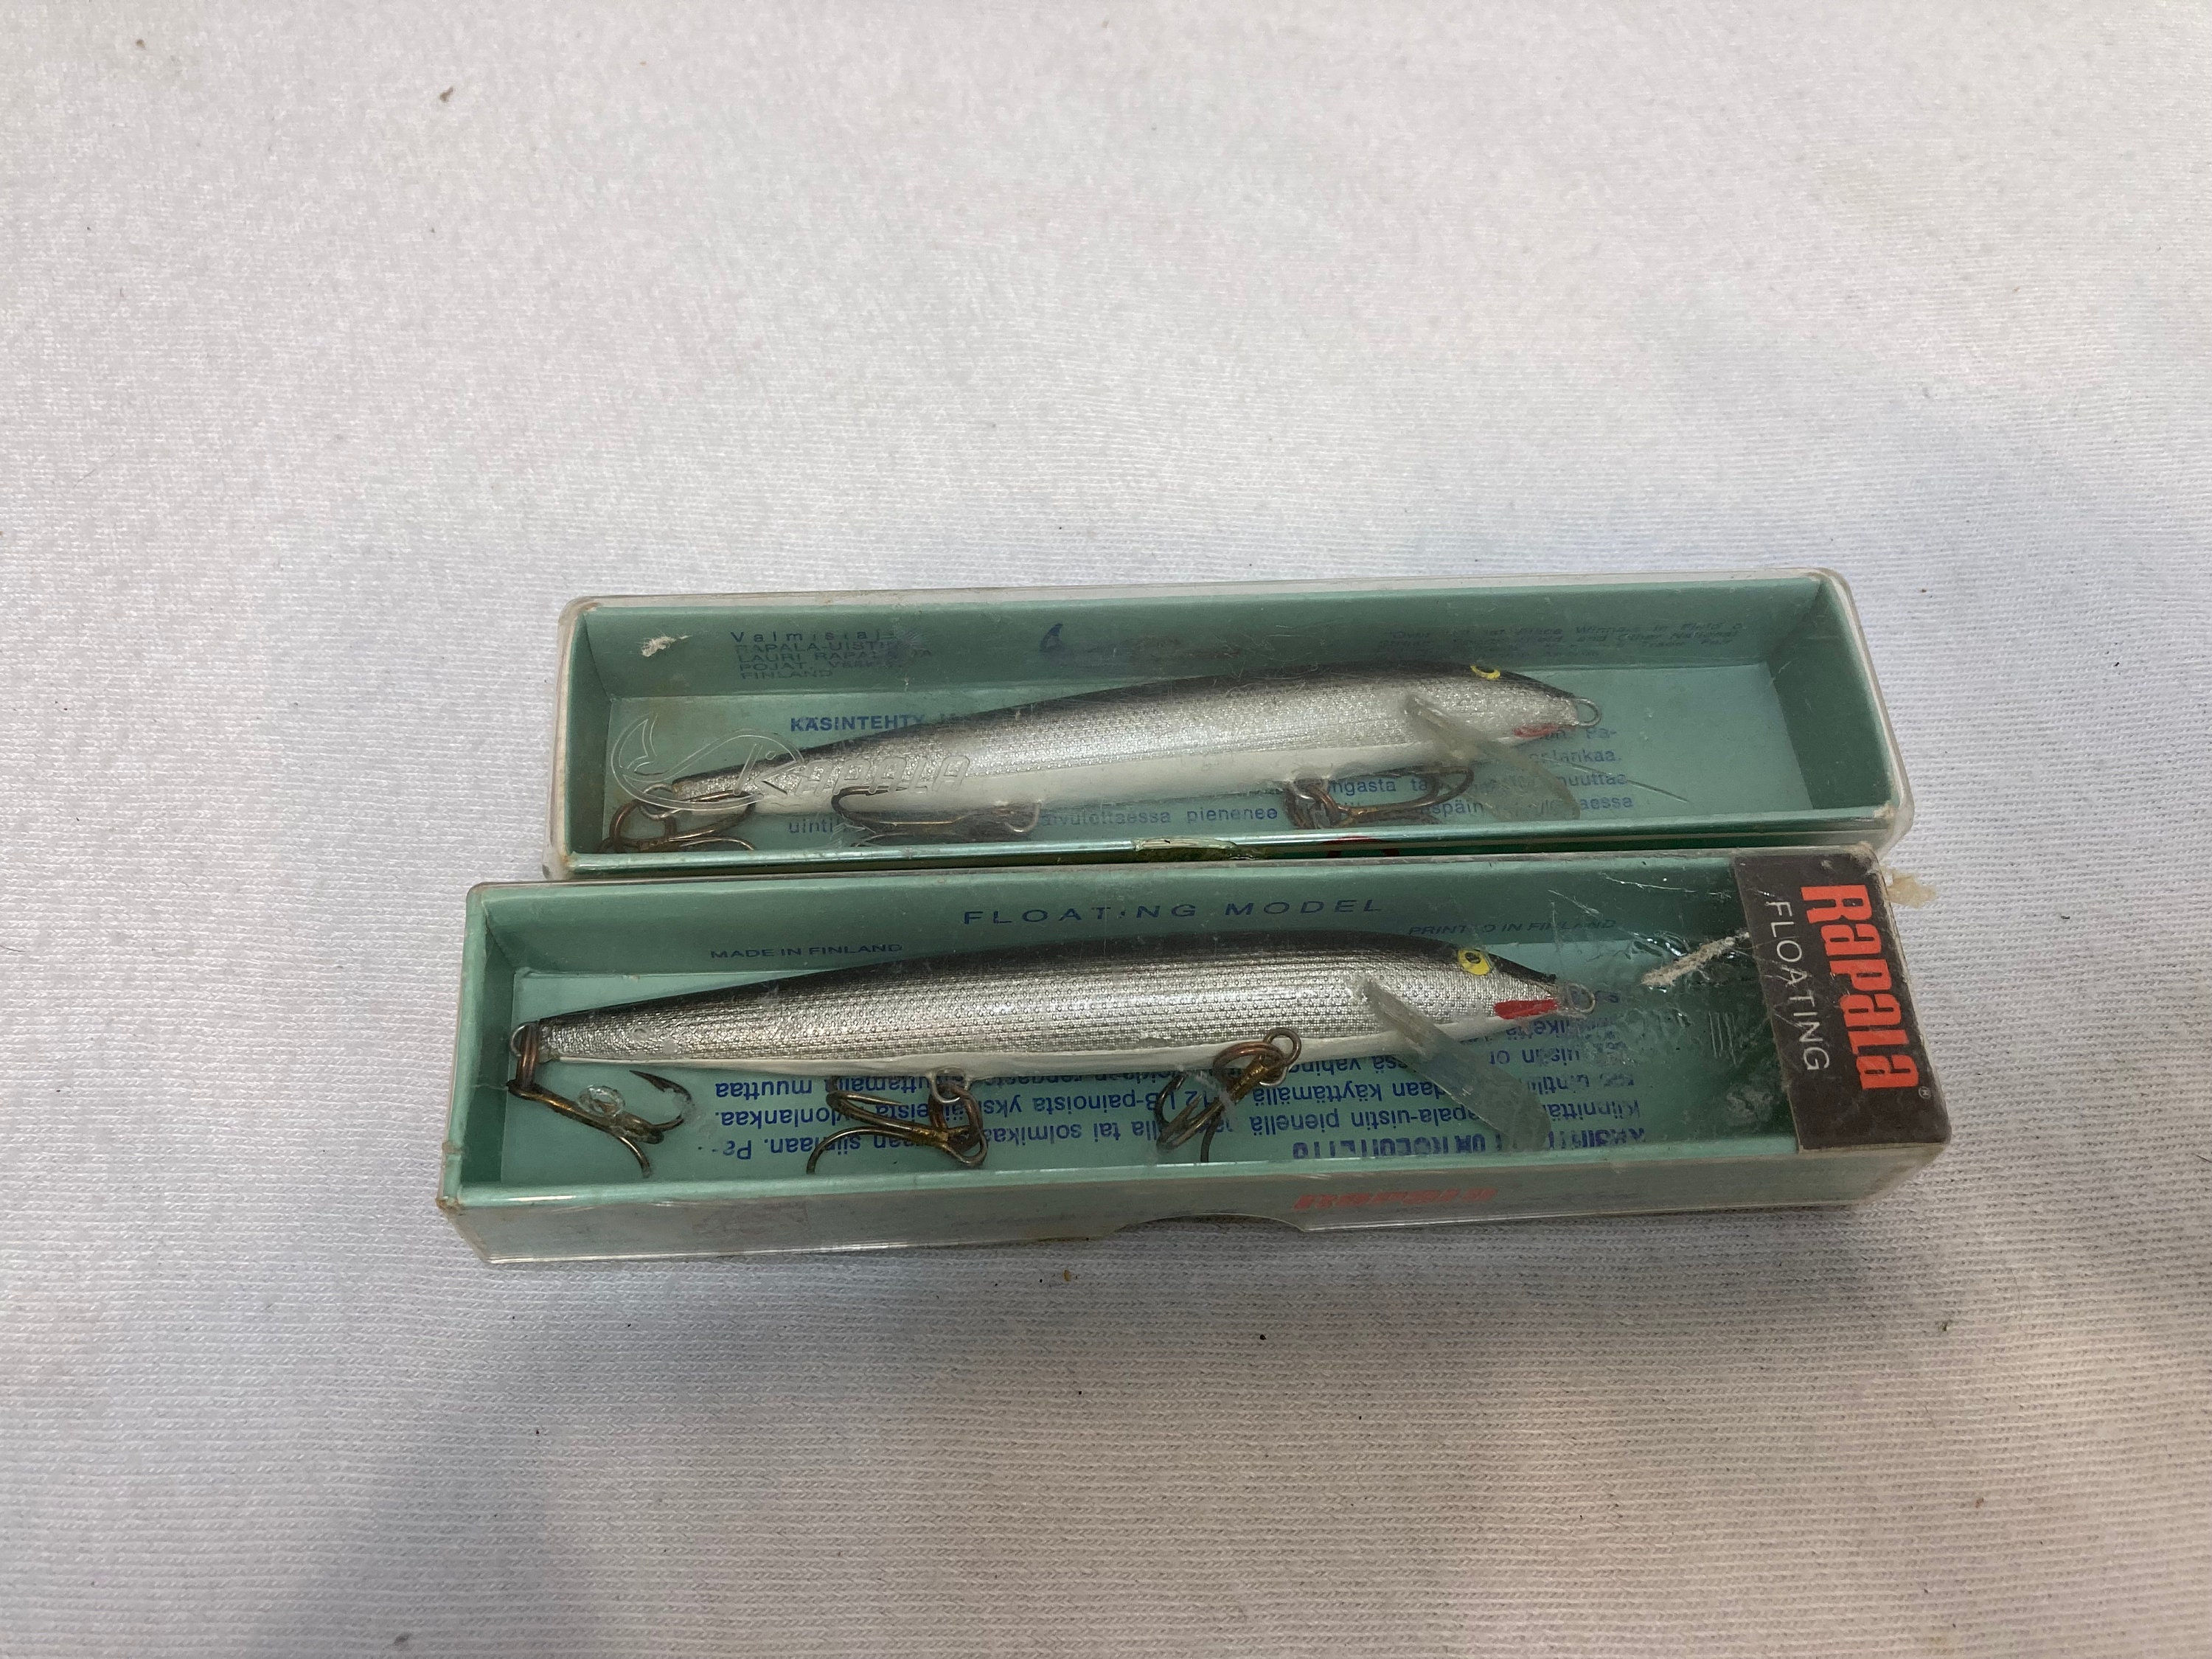 2 New Vintage Rapala Kelluva Floating Fishing Lures 13 S Hopea Silver 5 1/4  in Boxes 